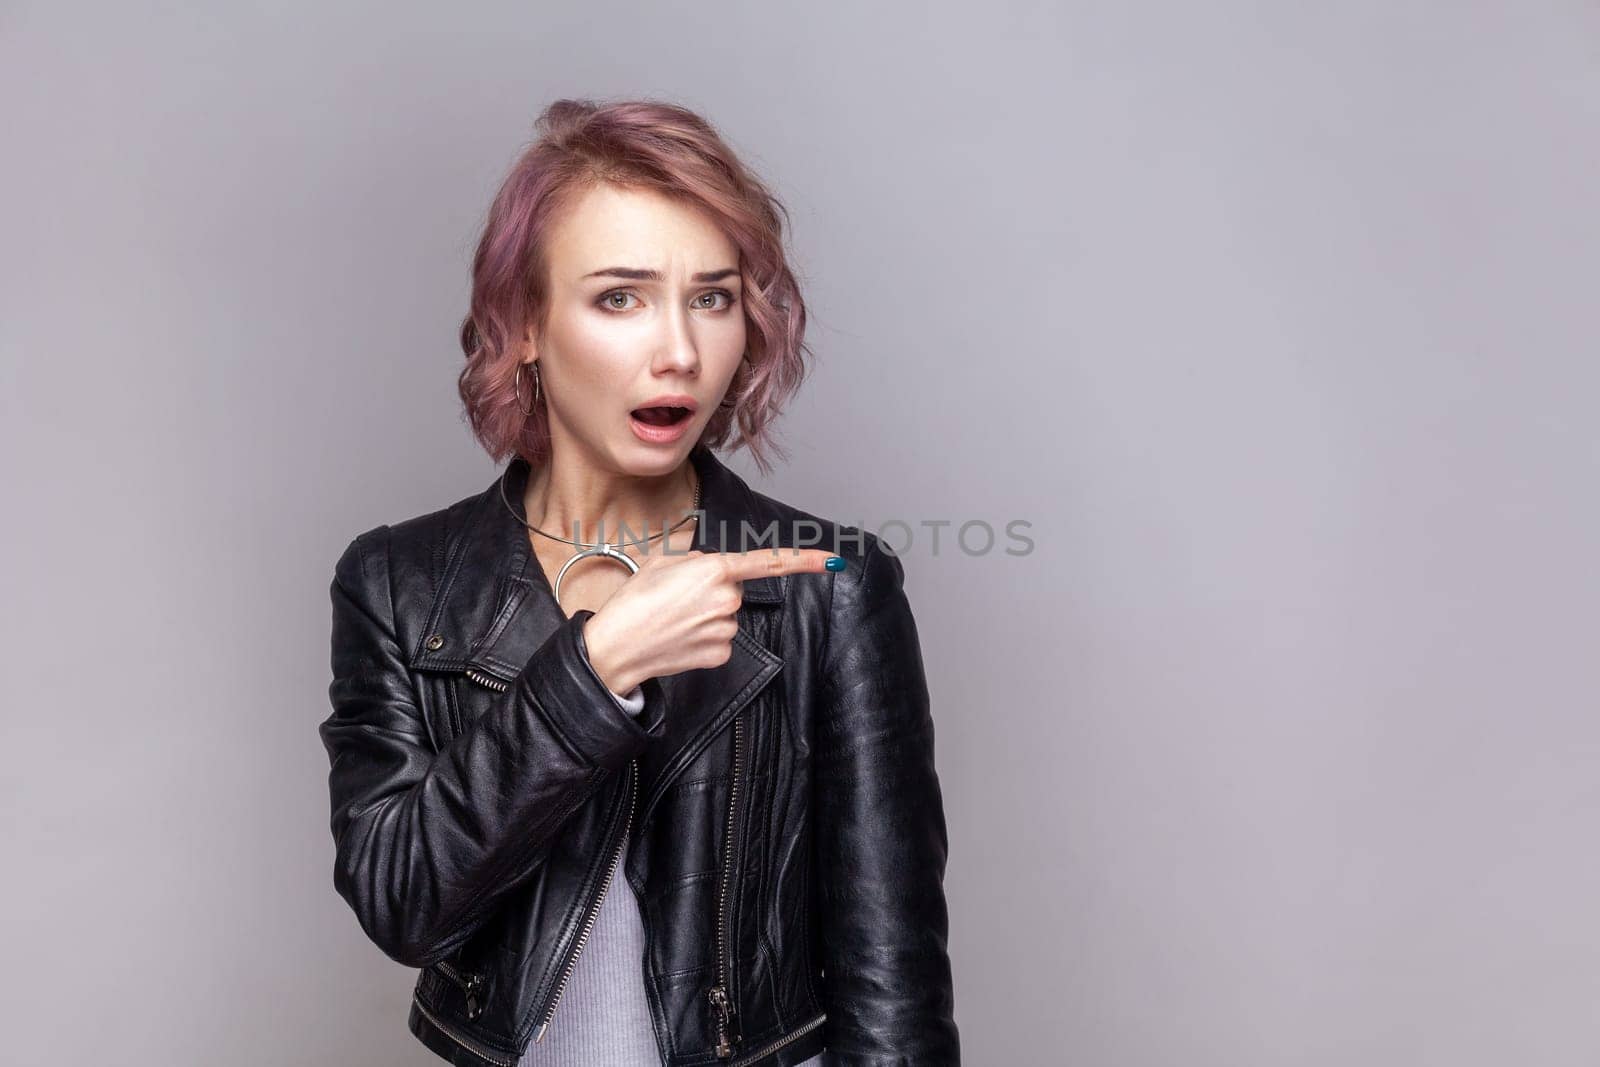 Portrait of shocked surprised woman with short hairstyle standing pointing away at copy space for advertisement, wearing black leather jacket. Indoor studio shot isolated on grey background.